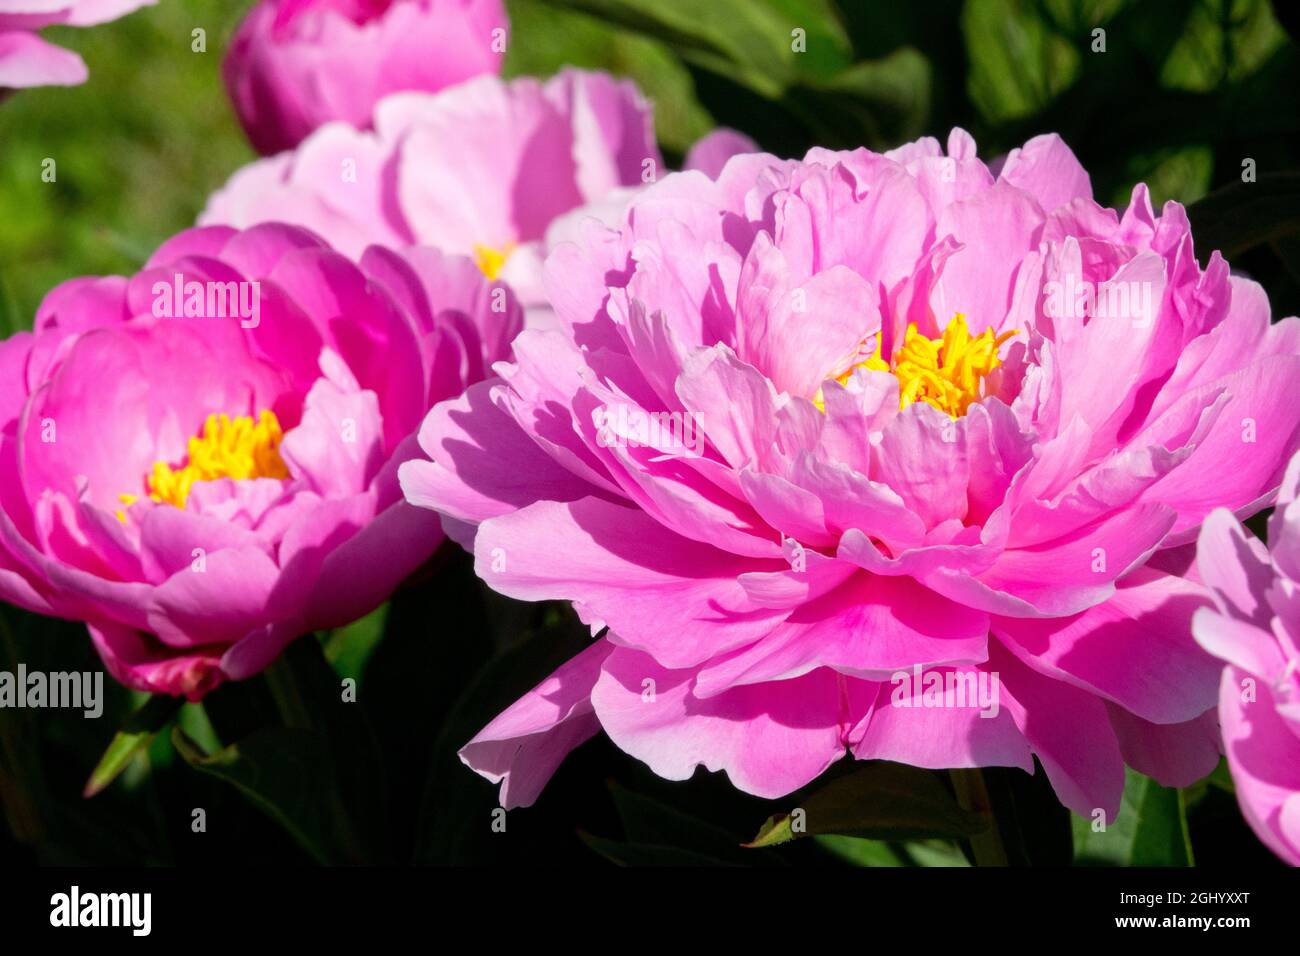 Pink Peony flowers 'Ma Petite Cherie' Delicate, dainty short garden peonies fragrant flower Stock Photo